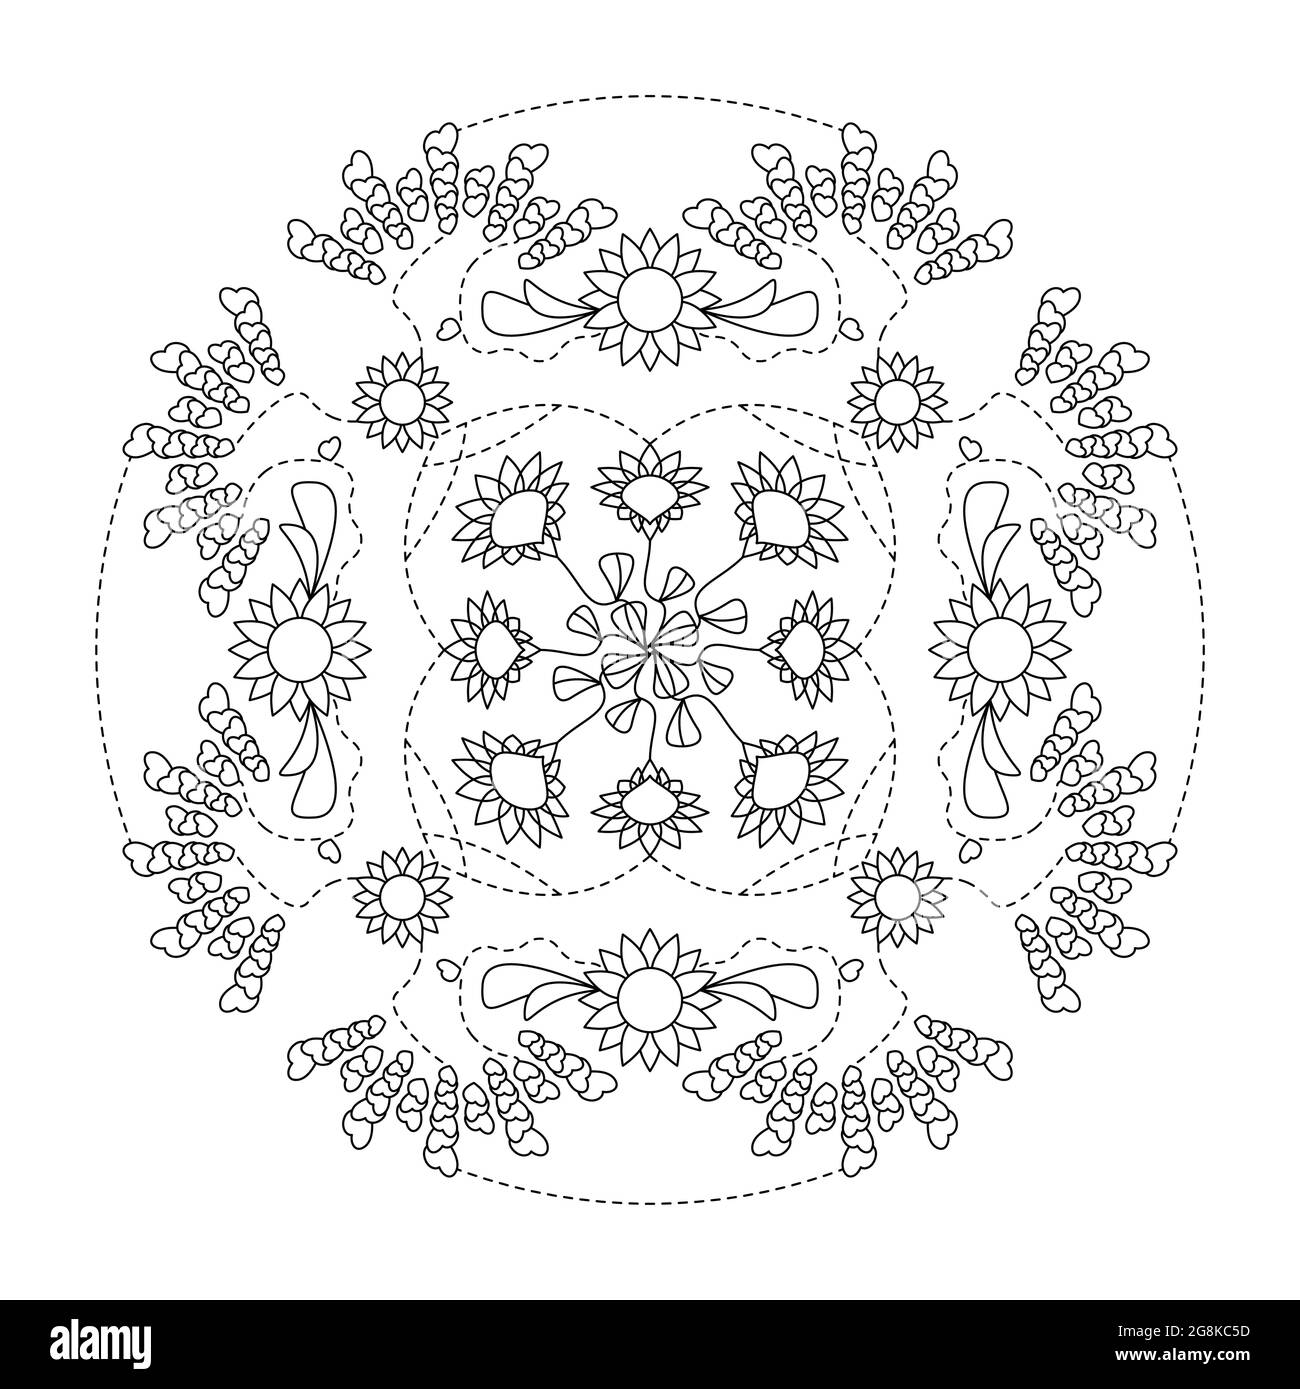 Mandala. Hearts and flowers. Anti-stress coloring page. Vector illustration black and white. Stock Vector